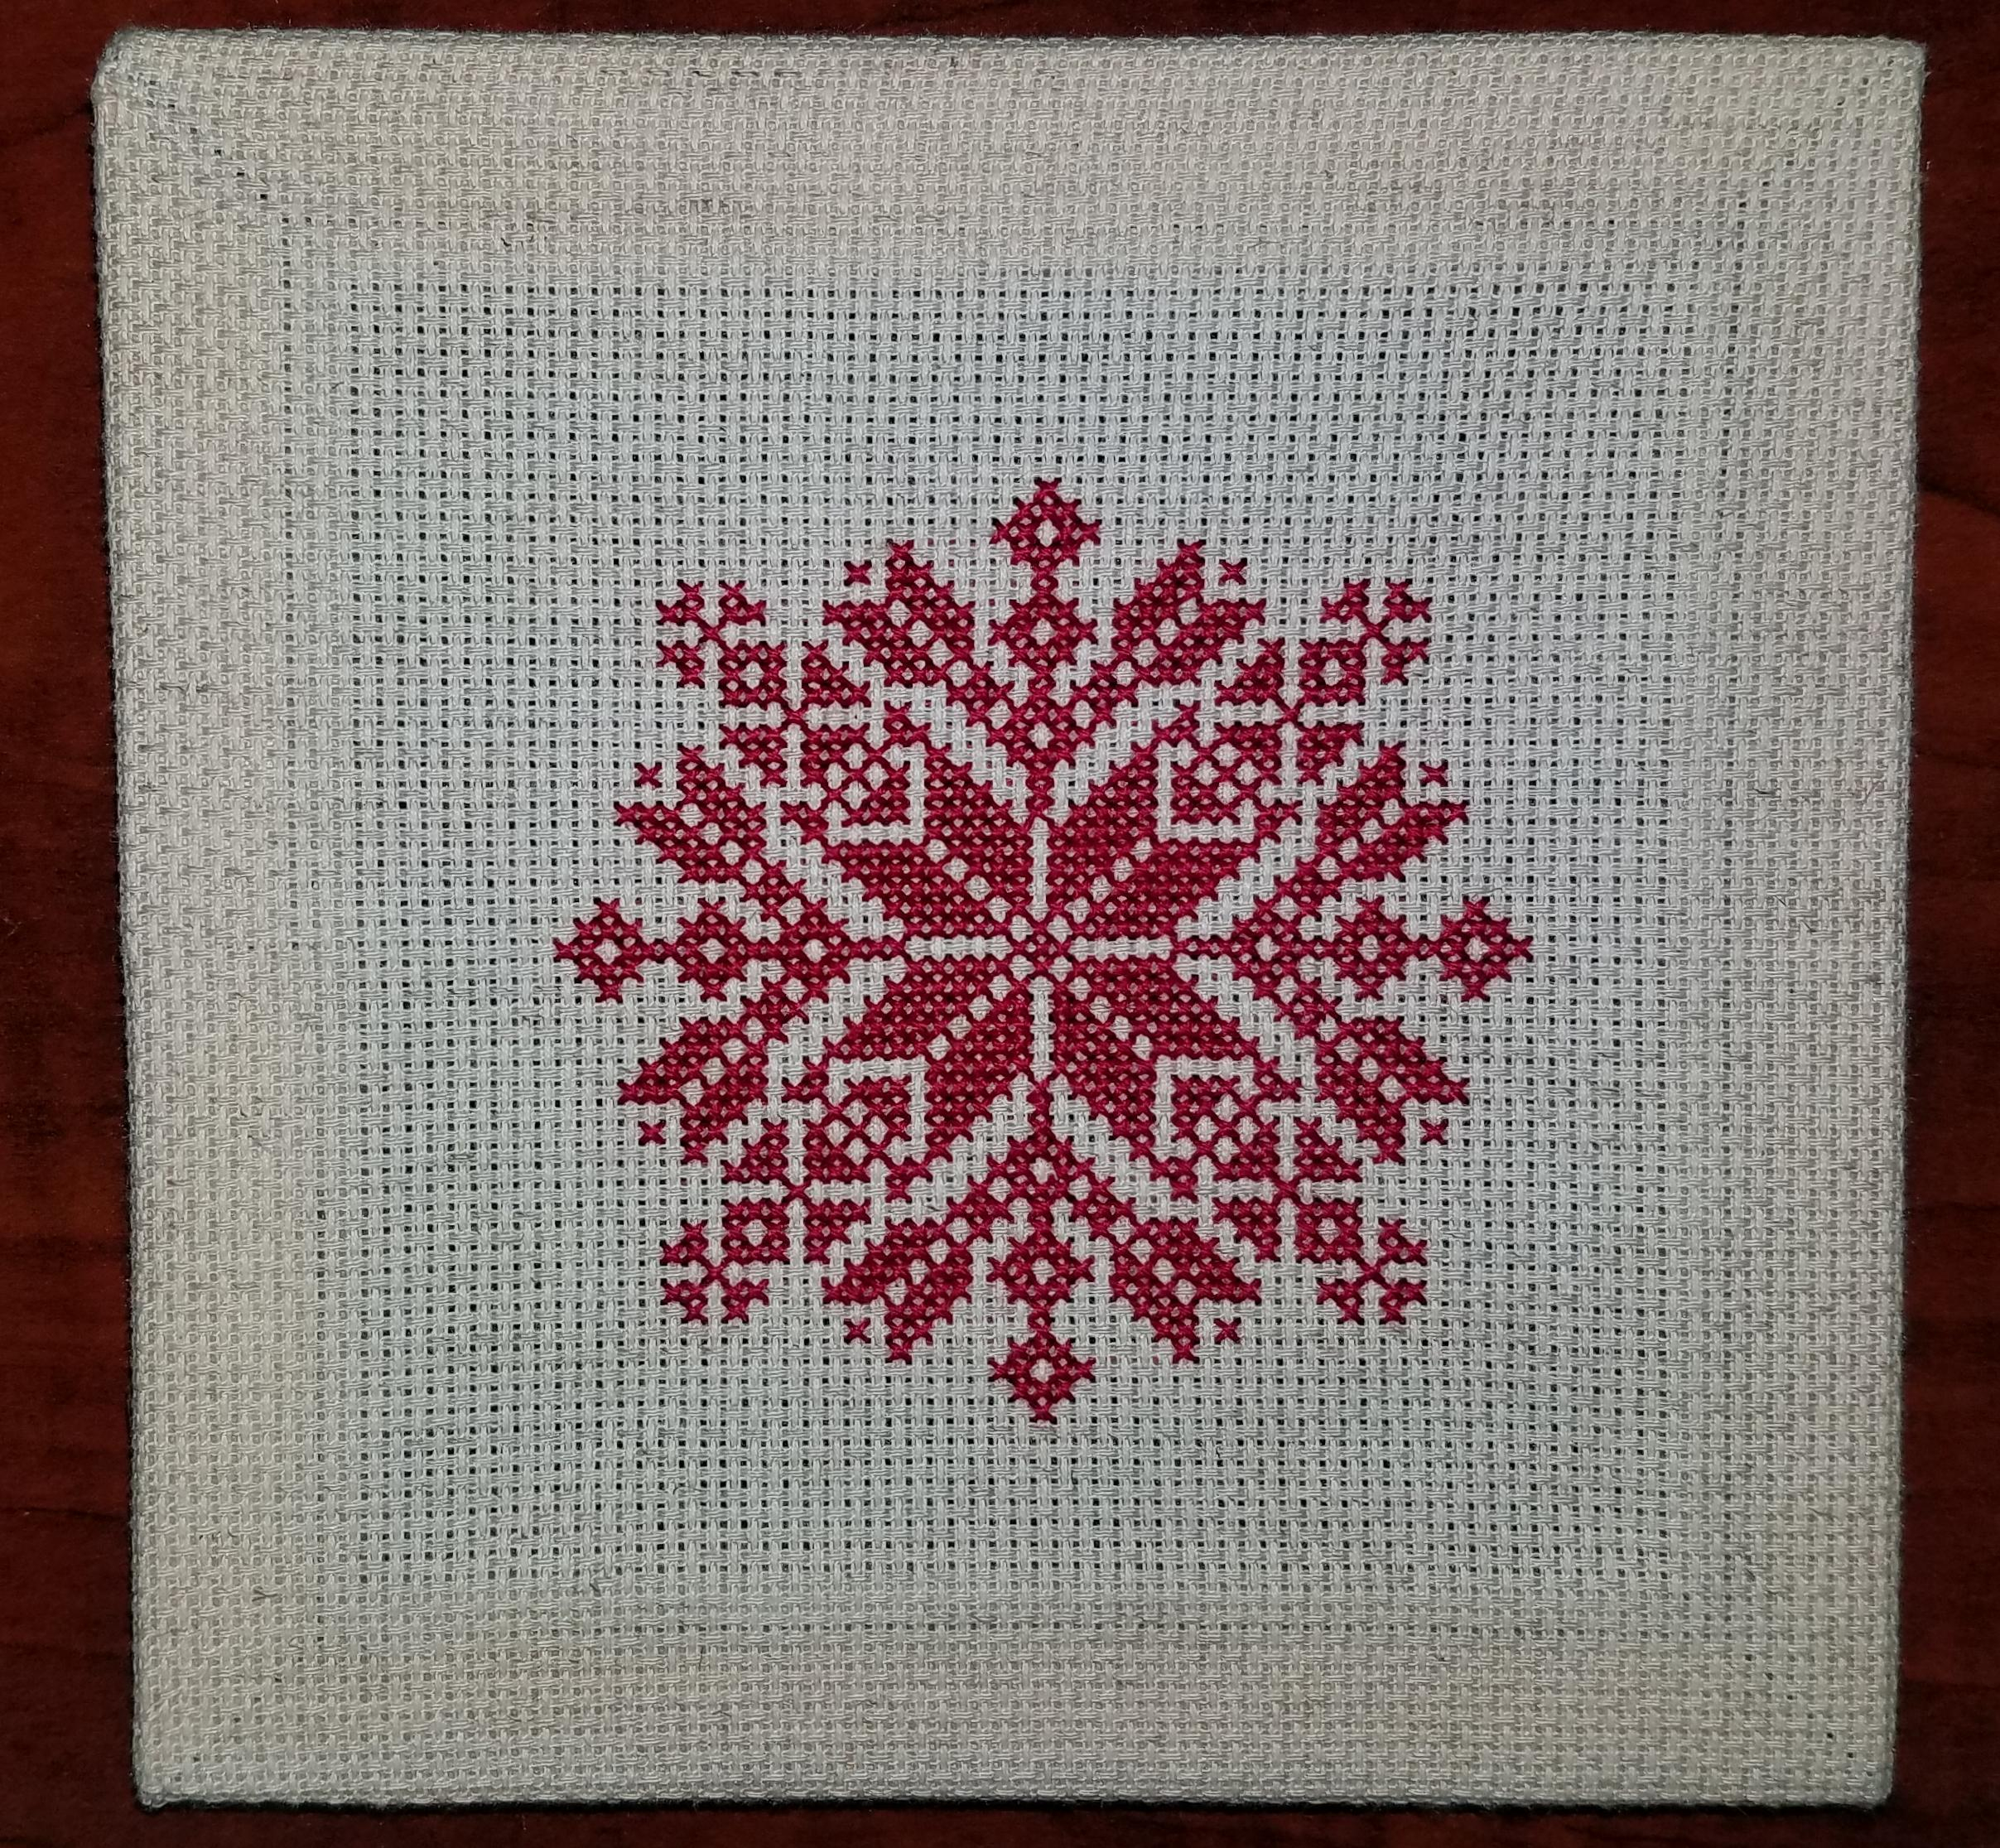 Snowflake Embroidery Pattern Fo Free Snowflake Pattern From Modern Folk Embroidery Great For A